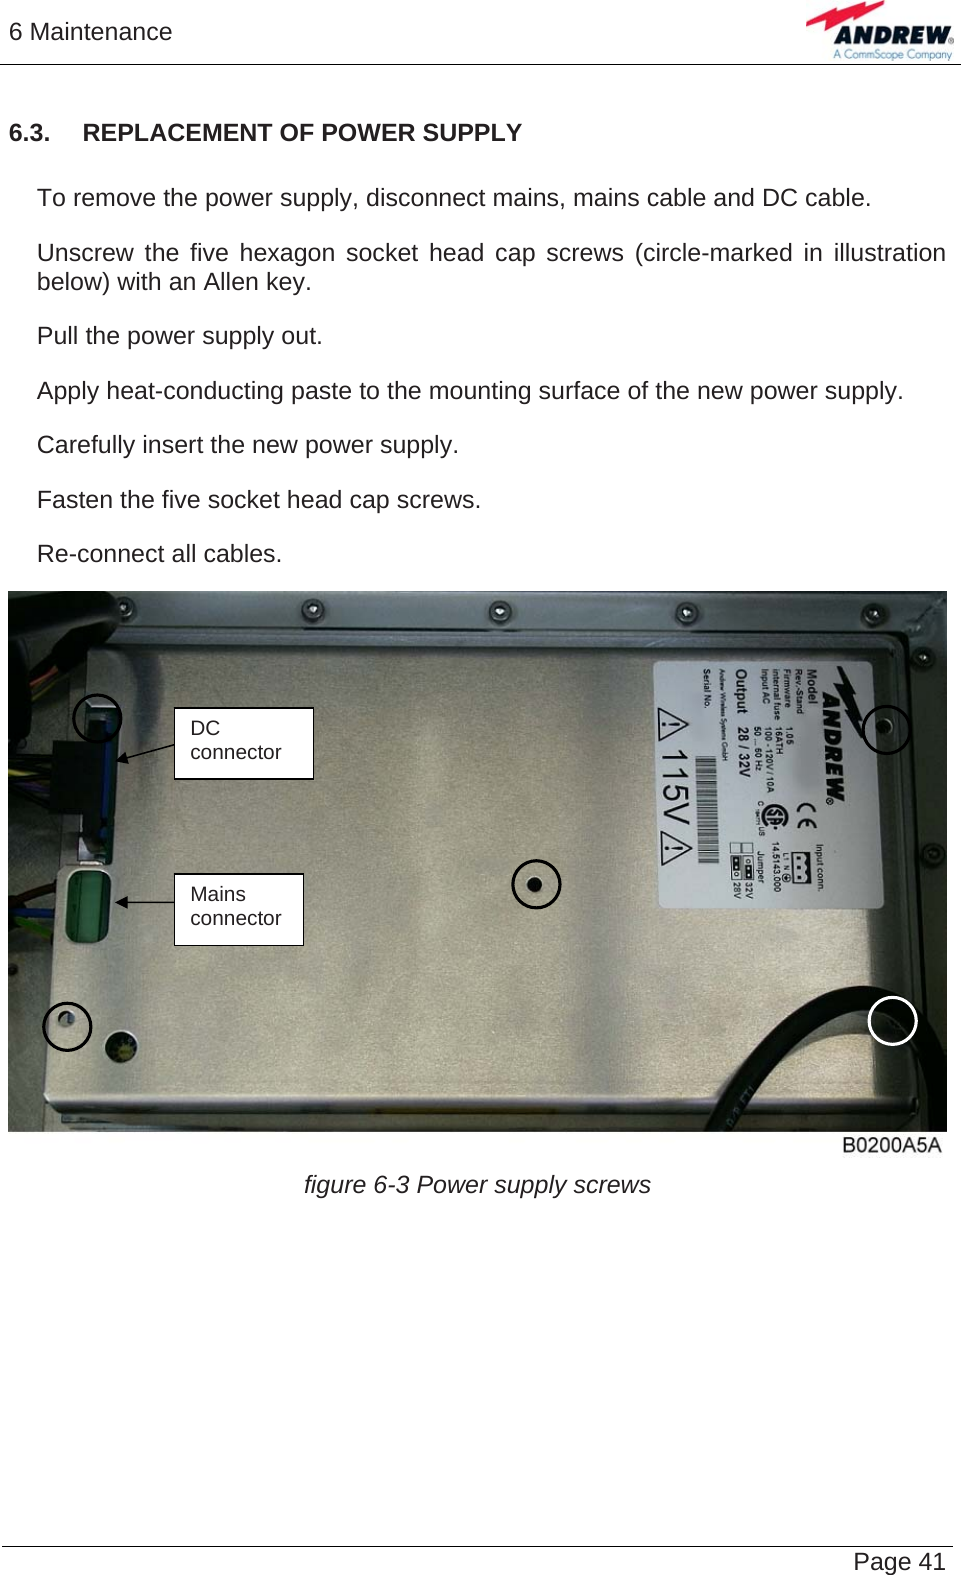 6 Maintenance   Page 416.3.  REPLACEMENT OF POWER SUPPLY     To remove the power supply, disconnect mains, mains cable and DC cable.     Unscrew the five hexagon socket head cap screws (circle-marked in illustration below) with an Allen key.     Pull the power supply out.     Apply heat-conducting paste to the mounting surface of the new power supply.     Carefully insert the new power supply.     Fasten the five socket head cap screws.     Re-connect all cables. figure 6-3 Power supply screws Mains connector DC connector   